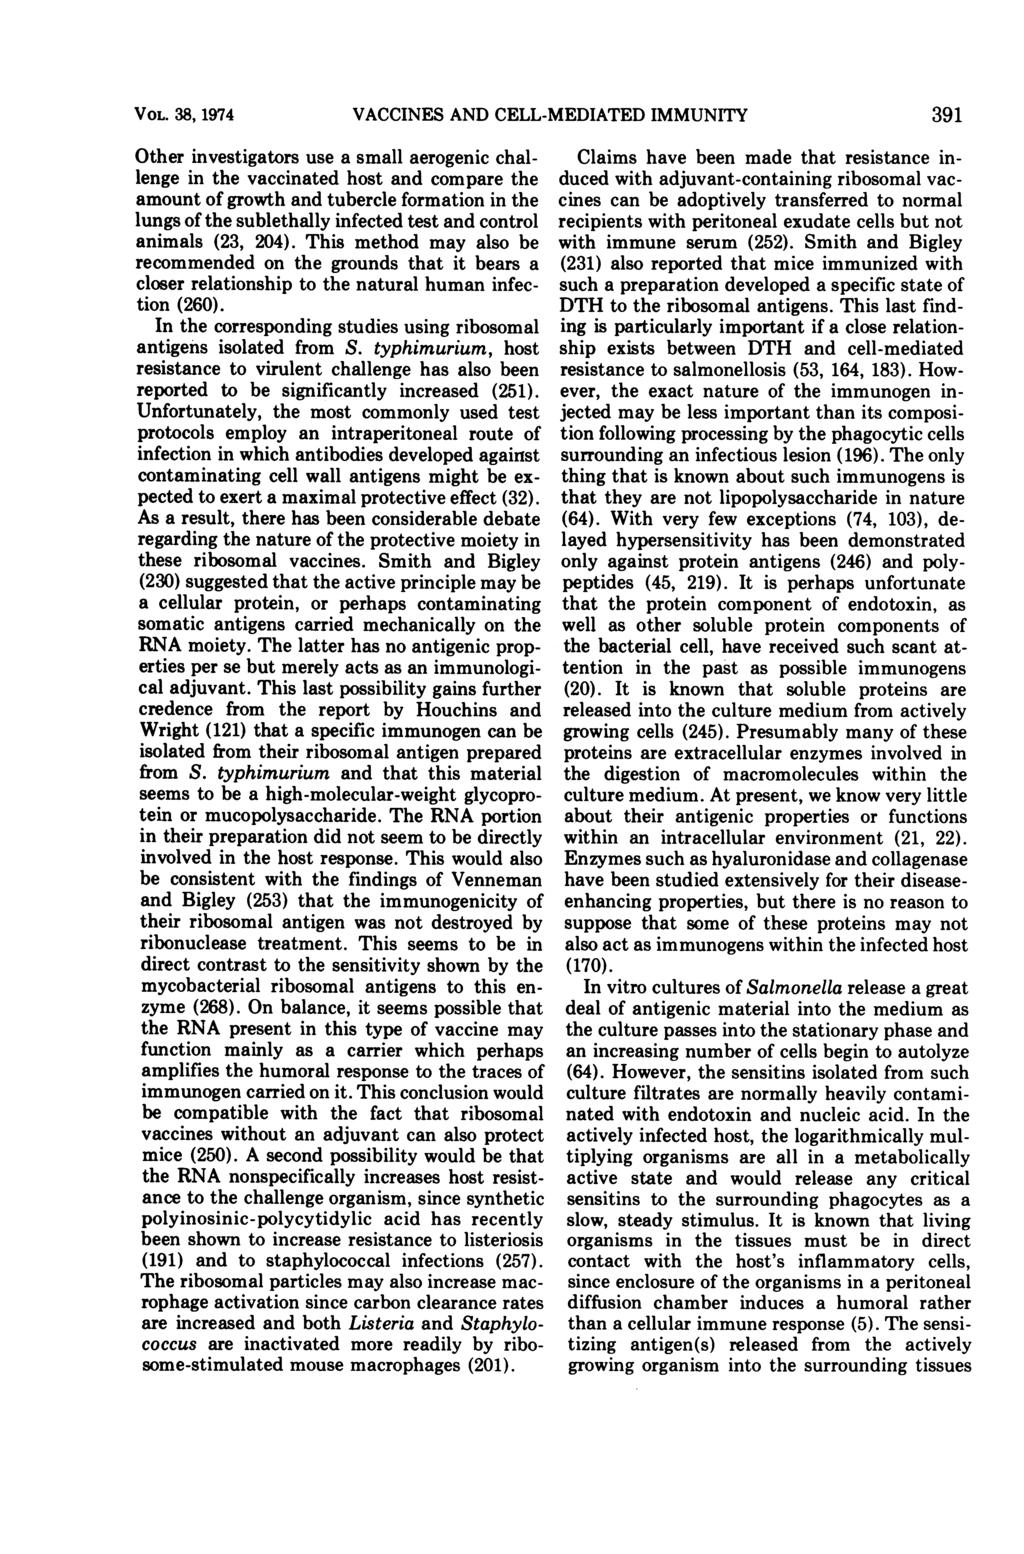 VOL. 38, 1974 VACCINES AND CELL-MEDIATED IMMUNITY 391 Other investigators use a small aerogenic challenge in the vaccinated host and compare the amount of growth and tubercle formation in the lungs